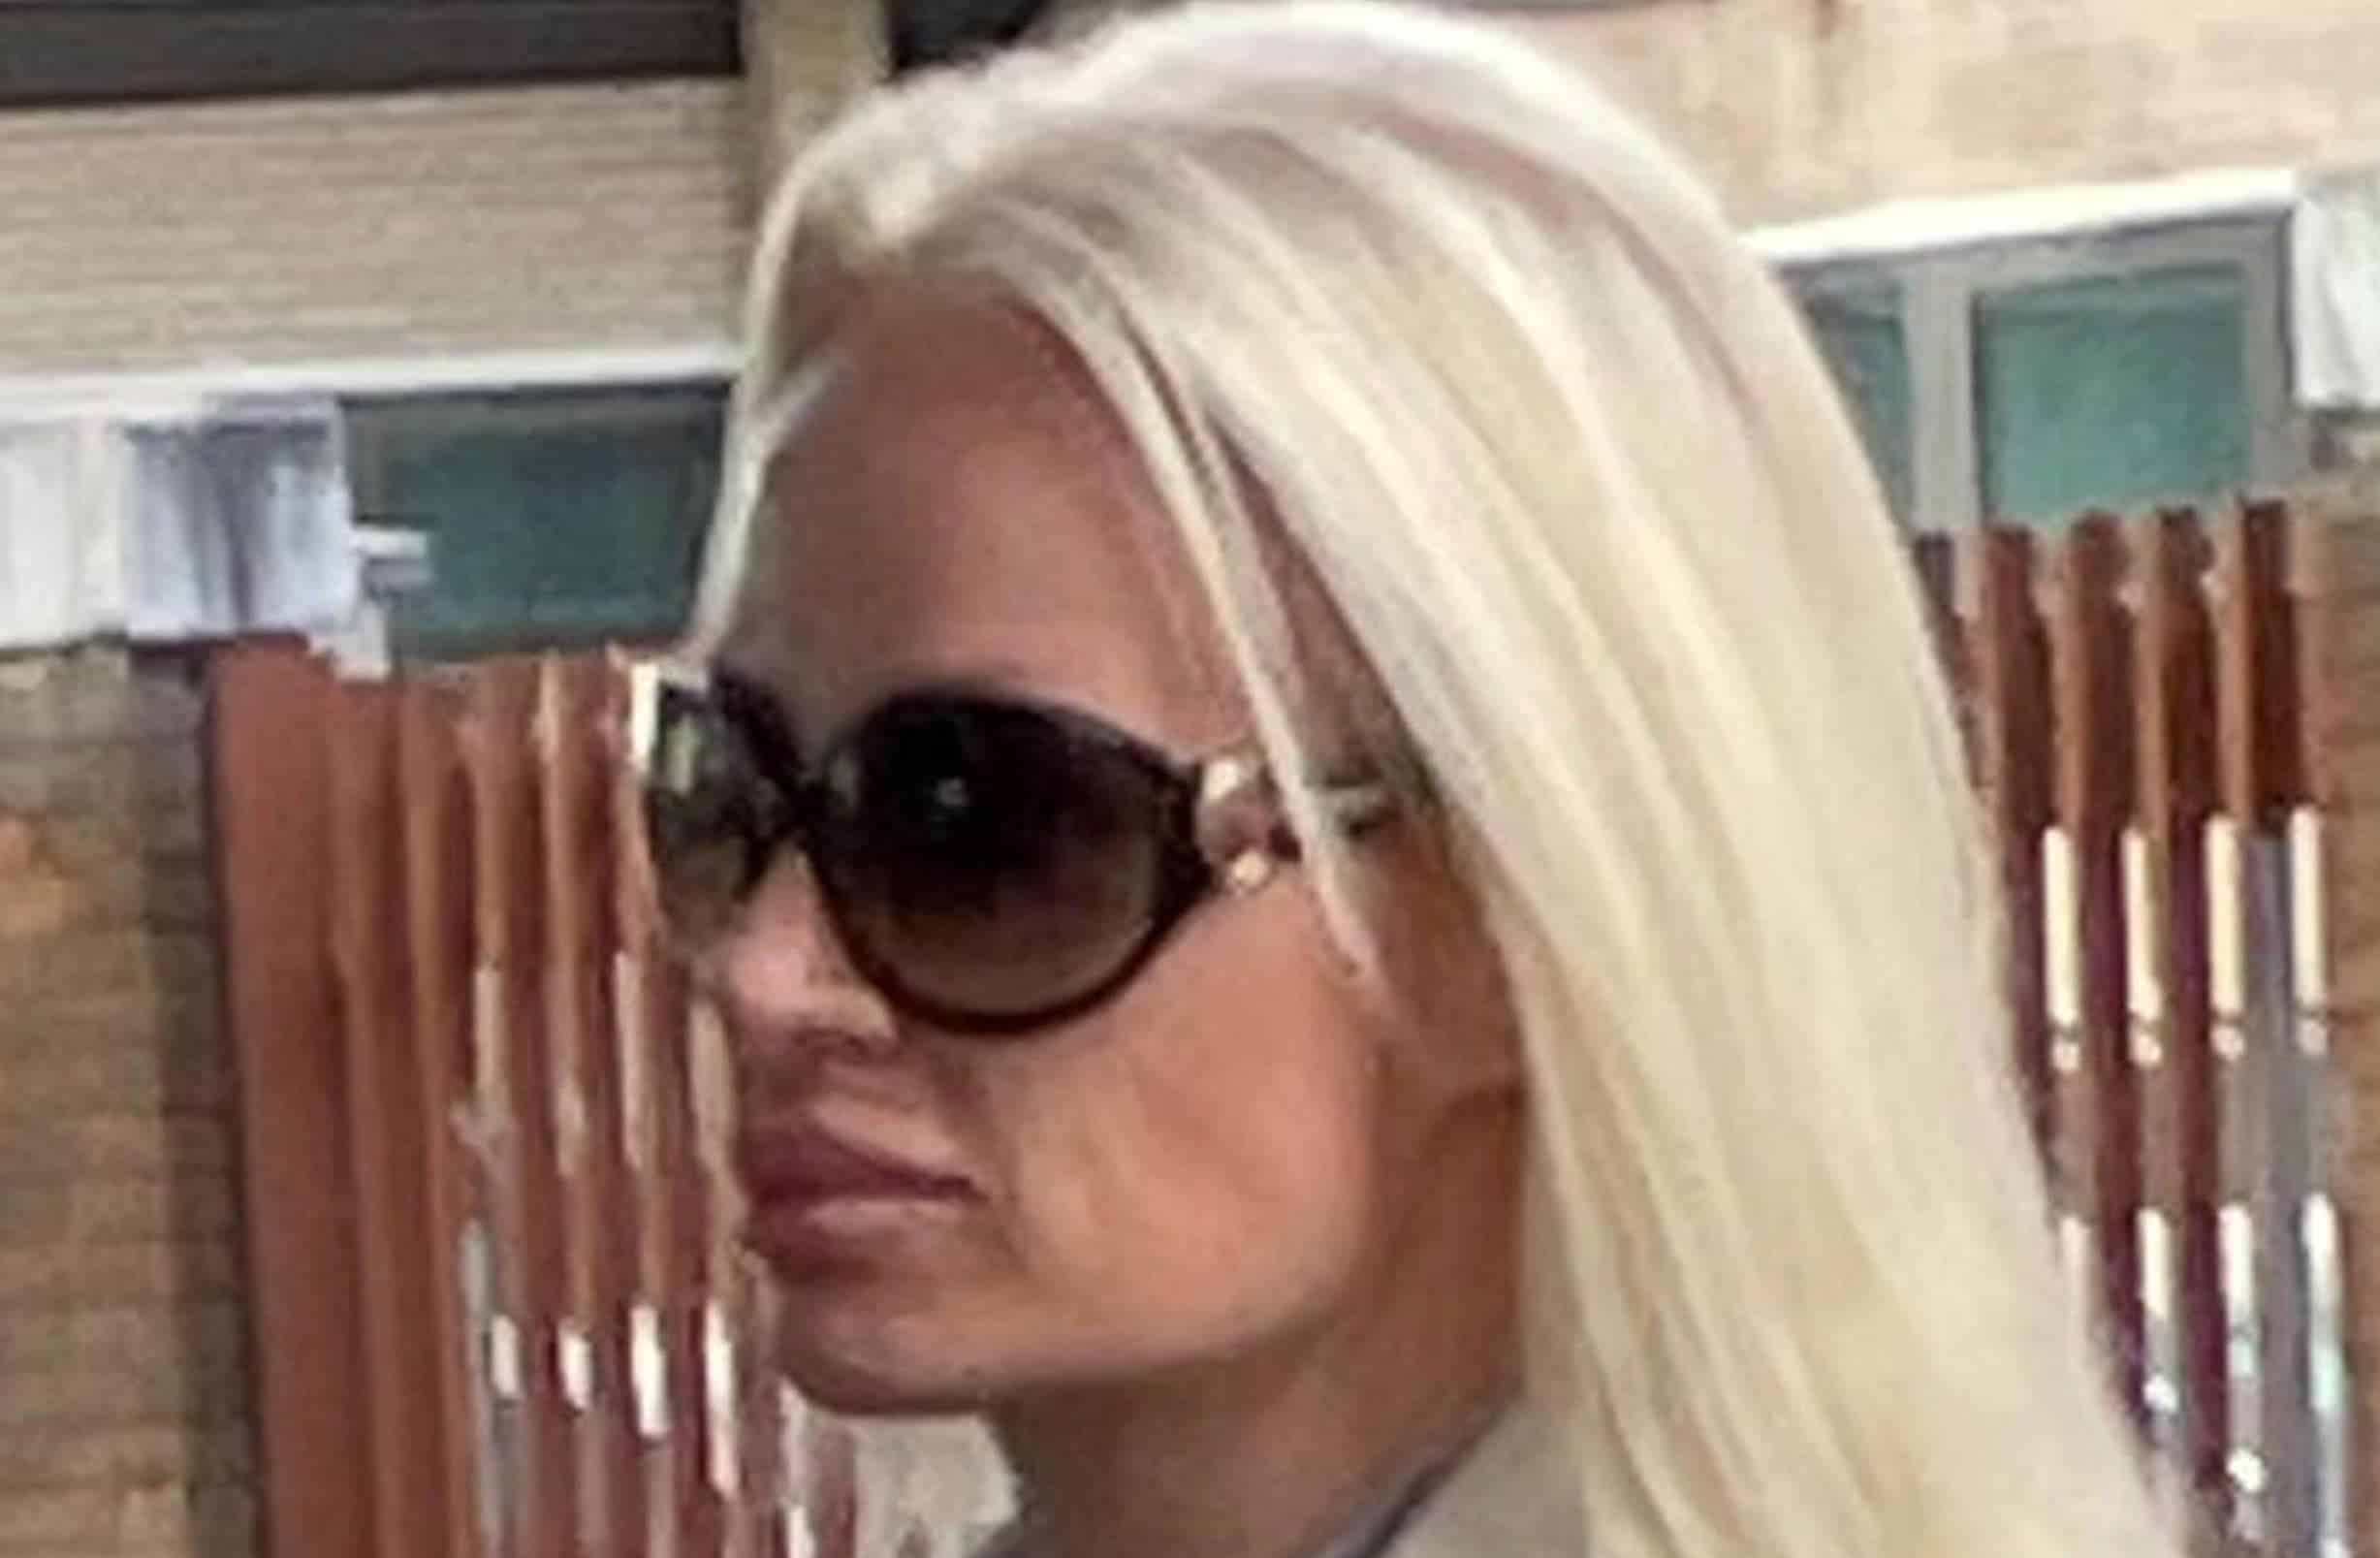 ‘Real-life Barbie’ barred from hospital ward after assaulting NHS workers